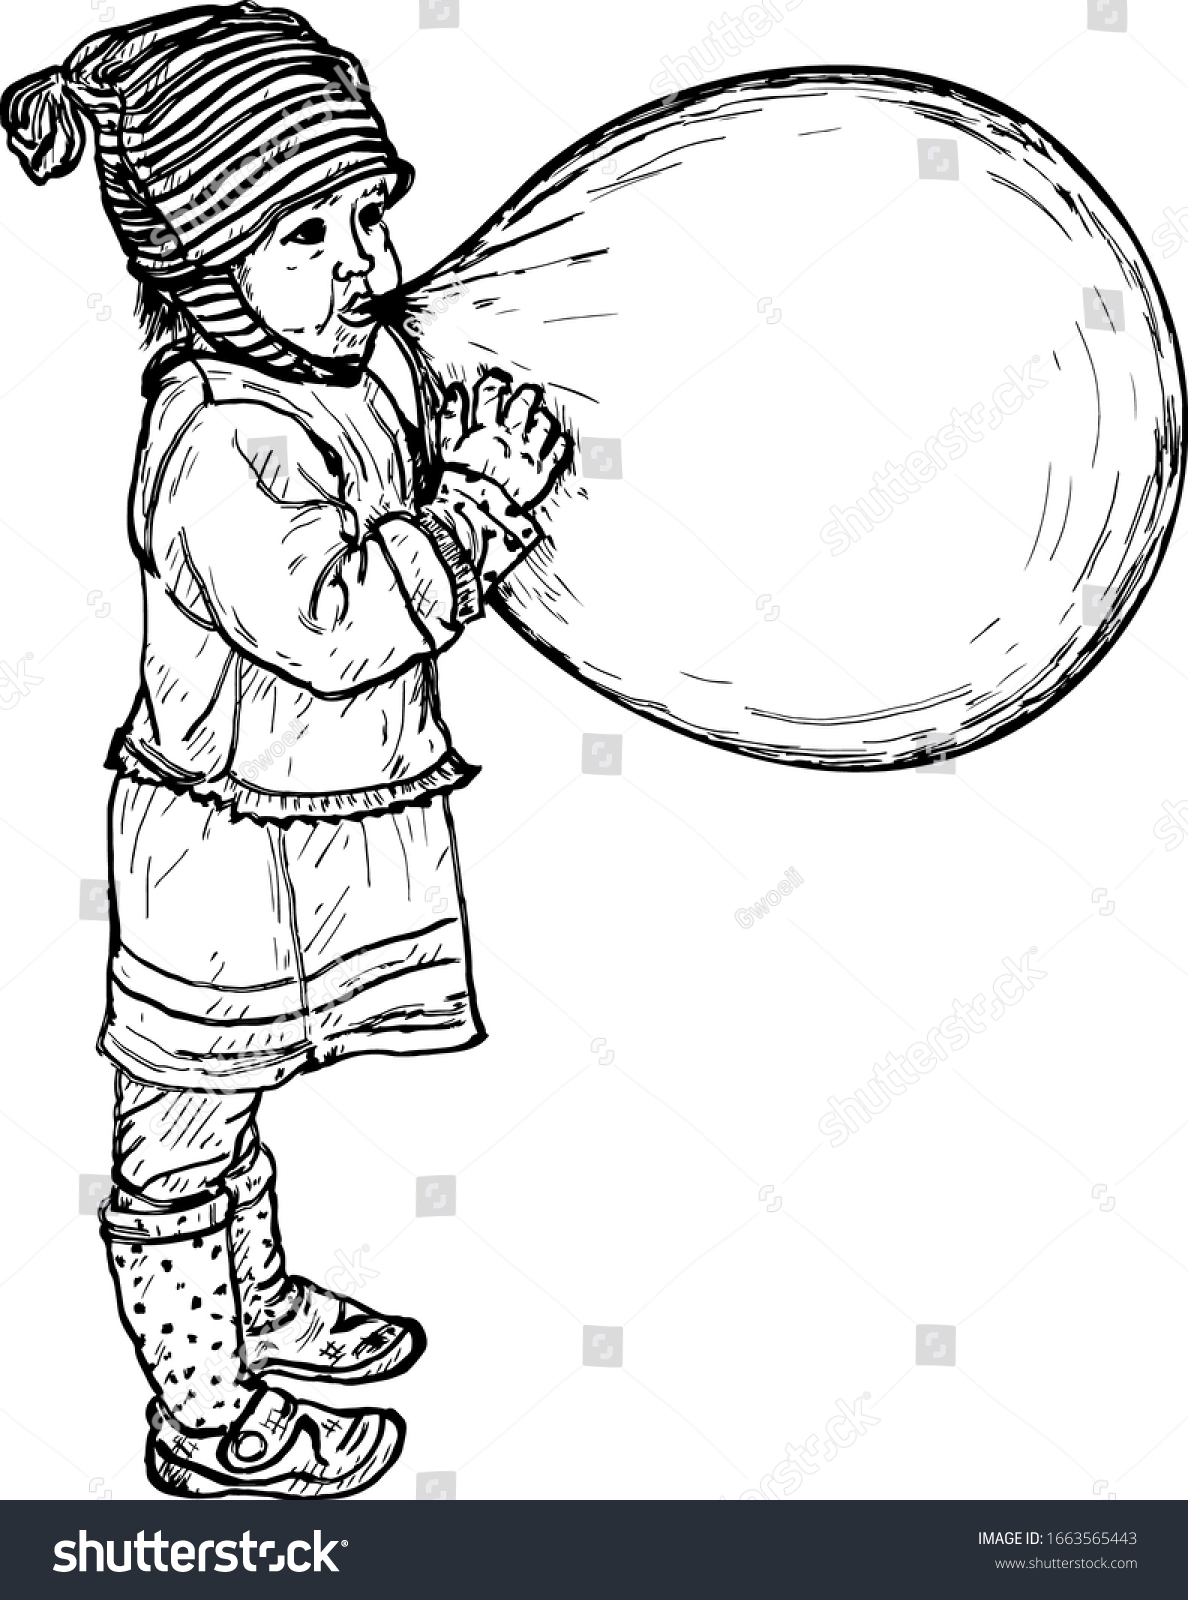 SVG of A young girl blowing a big bubble gum balloon. Hand drawn vector illustration. svg